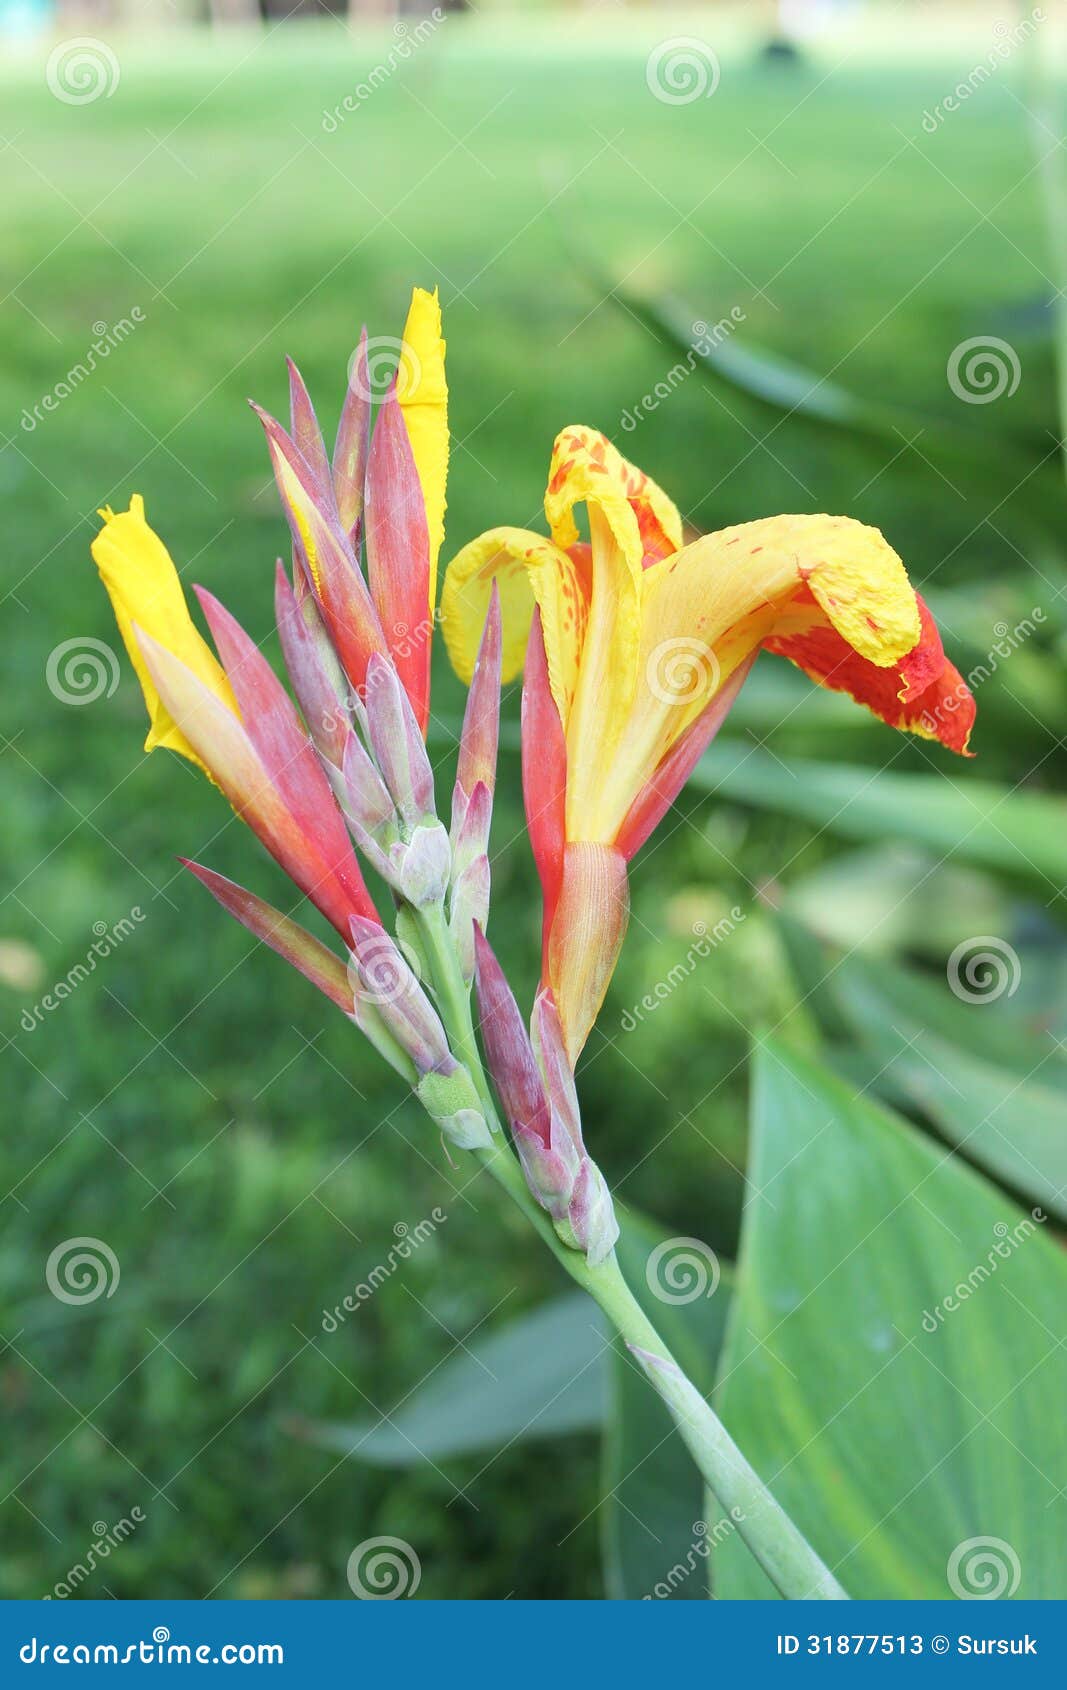 Yellow And Red Canna Flowers And Buds Stock Image Image Of Buds Beautiful 31877513